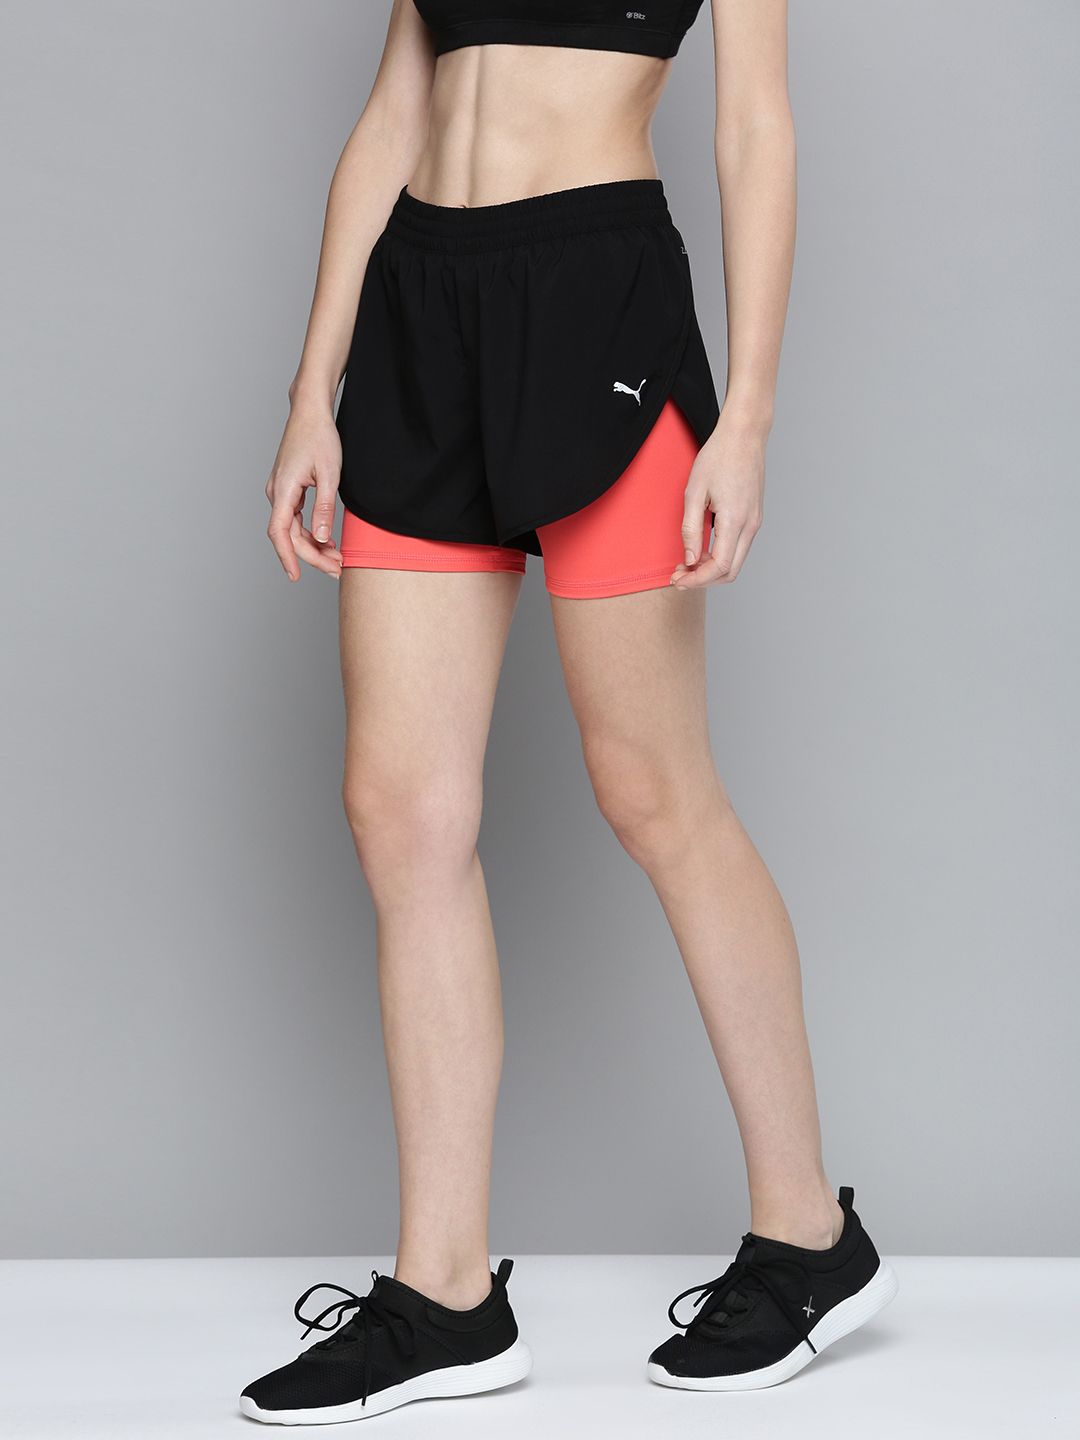 Puma Women Black DryCell Colourblocked Layered 2-in-1 Run Shorts Price in India